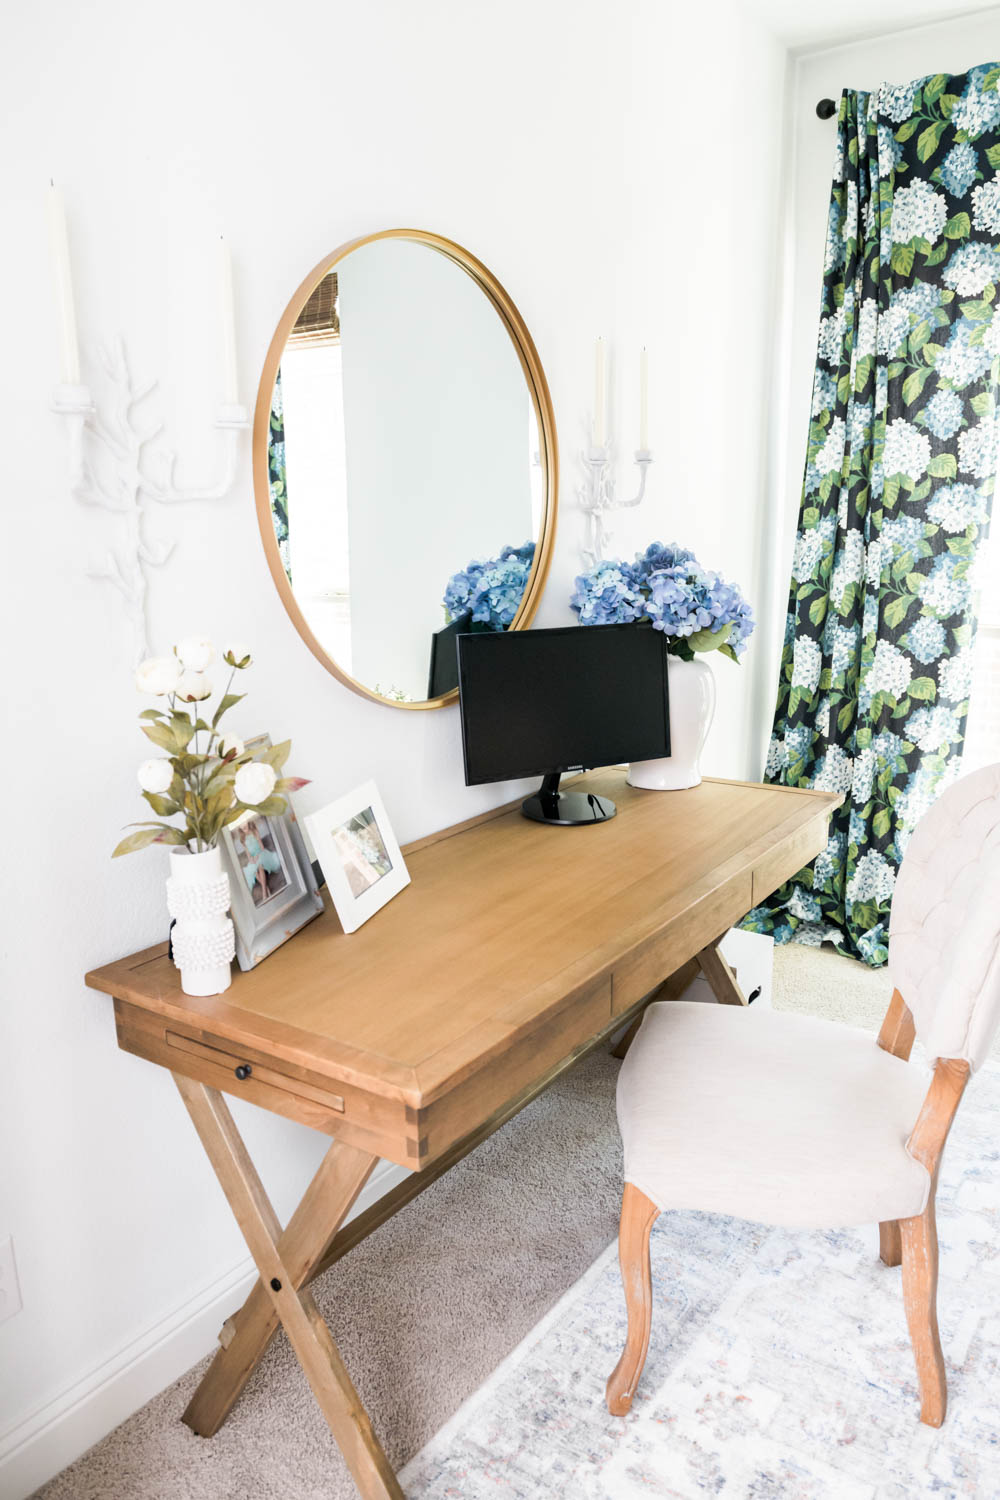 Round mirror above a wood desk adds light to a small home office space.